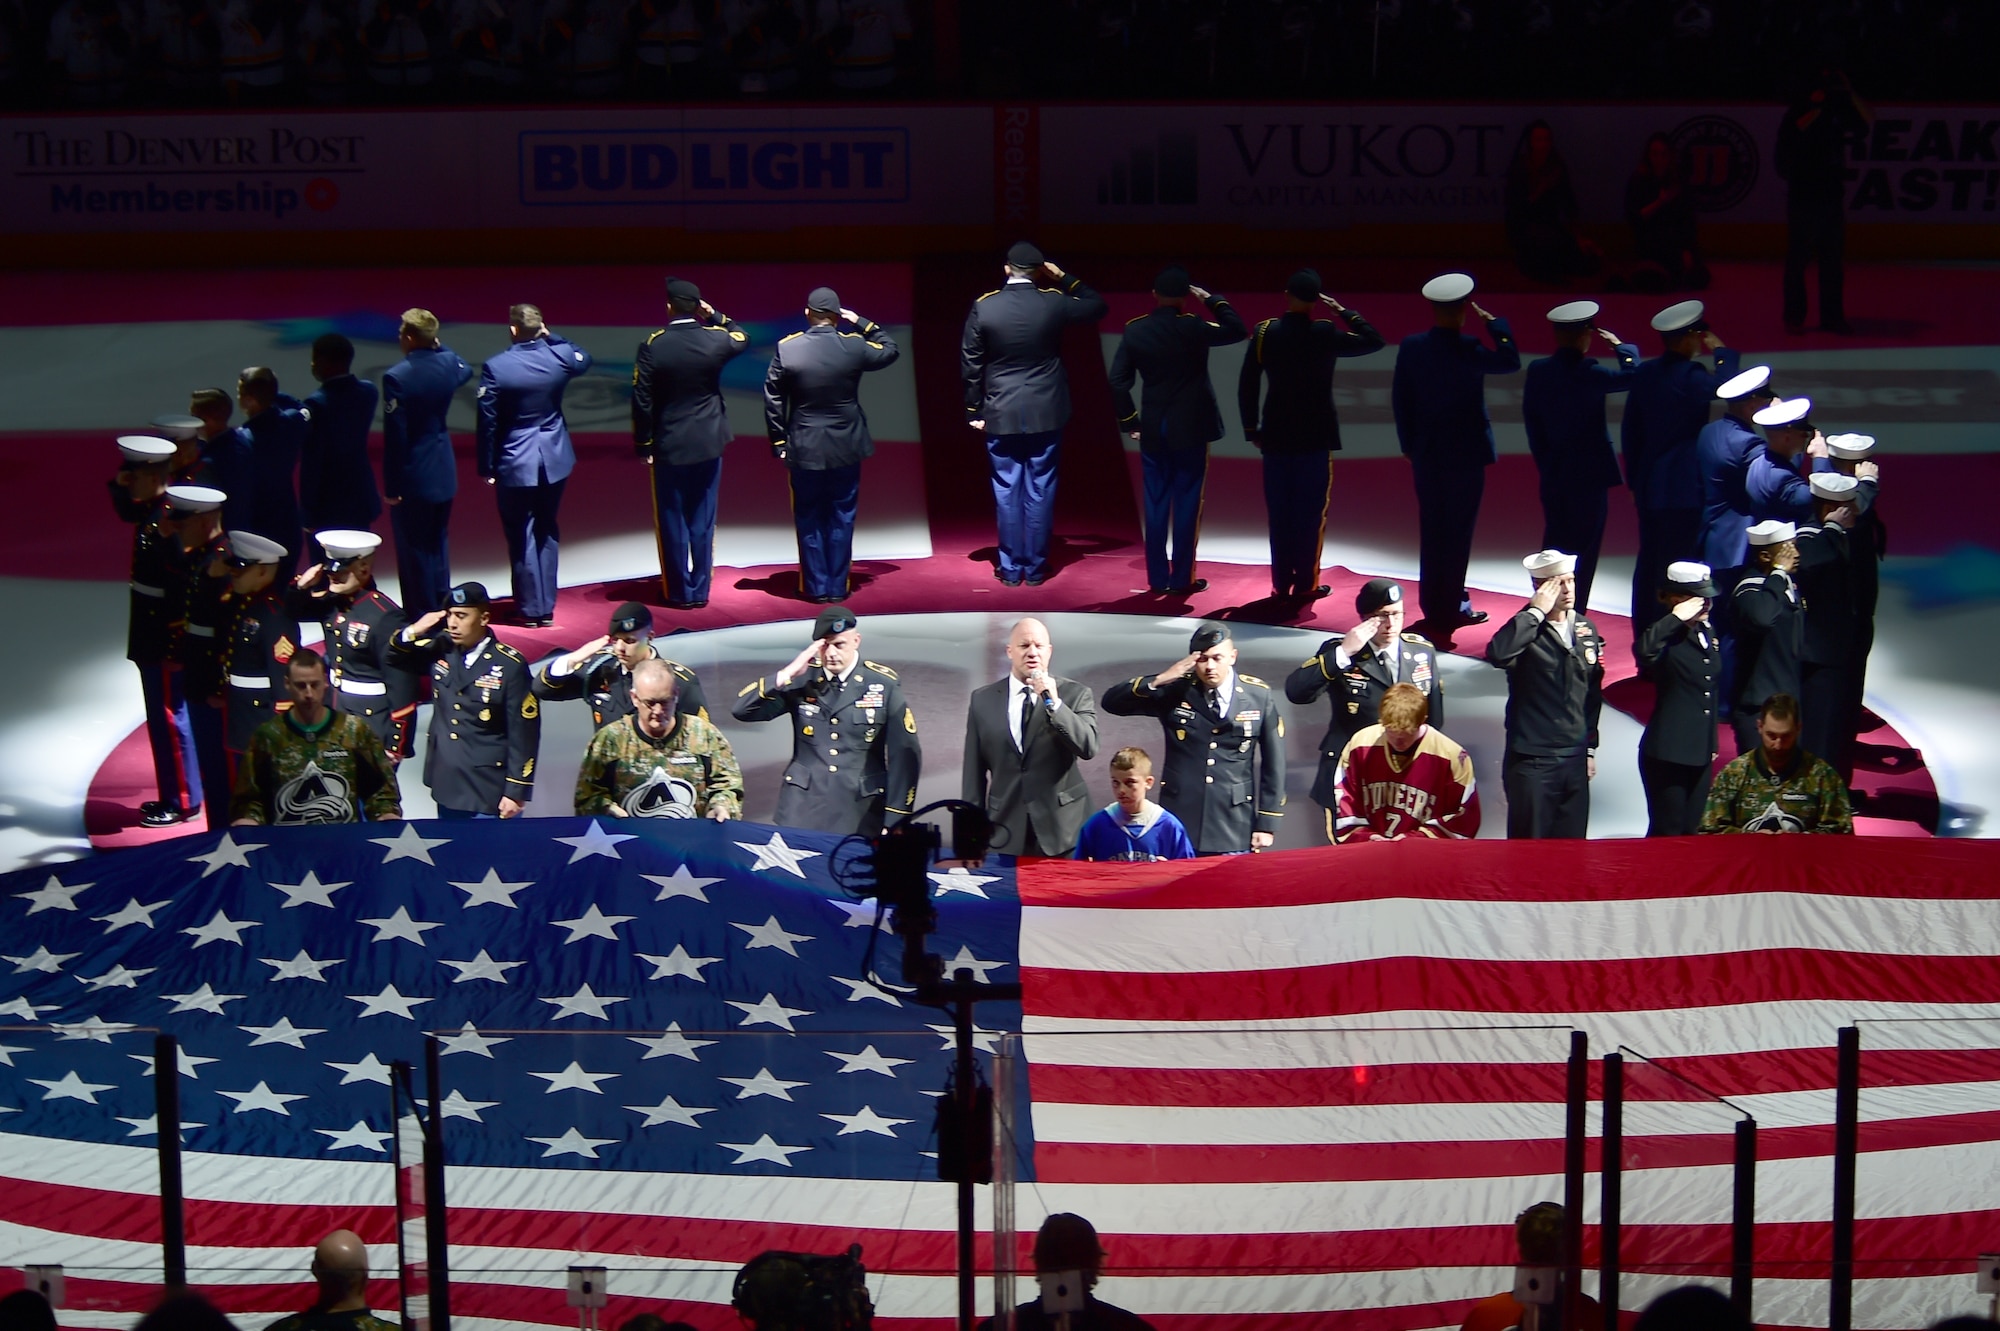 Military members from all branches gathered at center ice for the national anthem March 5, 2016, at the Pepsi Center in Denver, Colo. The Colorado Avalanche held the fifth annual “Military Appreciation Day” to honor military members for their service to the United States. (U.S. Air Force photo by Airman 1st Class Luke W. Nowakowski/Released)